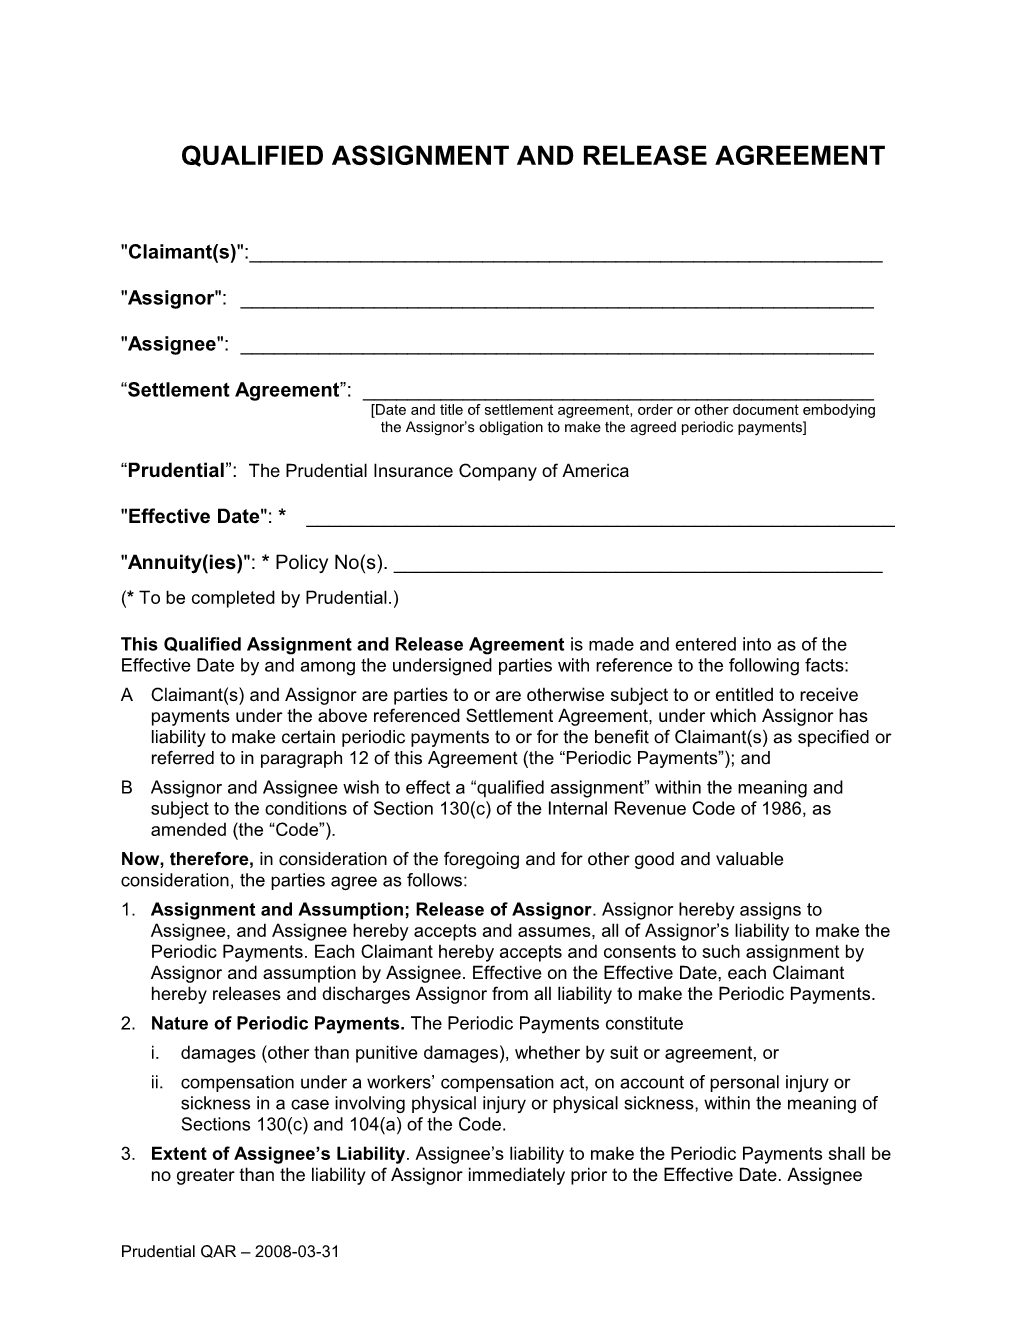 This Qualified Assignment and Release Agreement Is Made and Entered Into As of the Effective